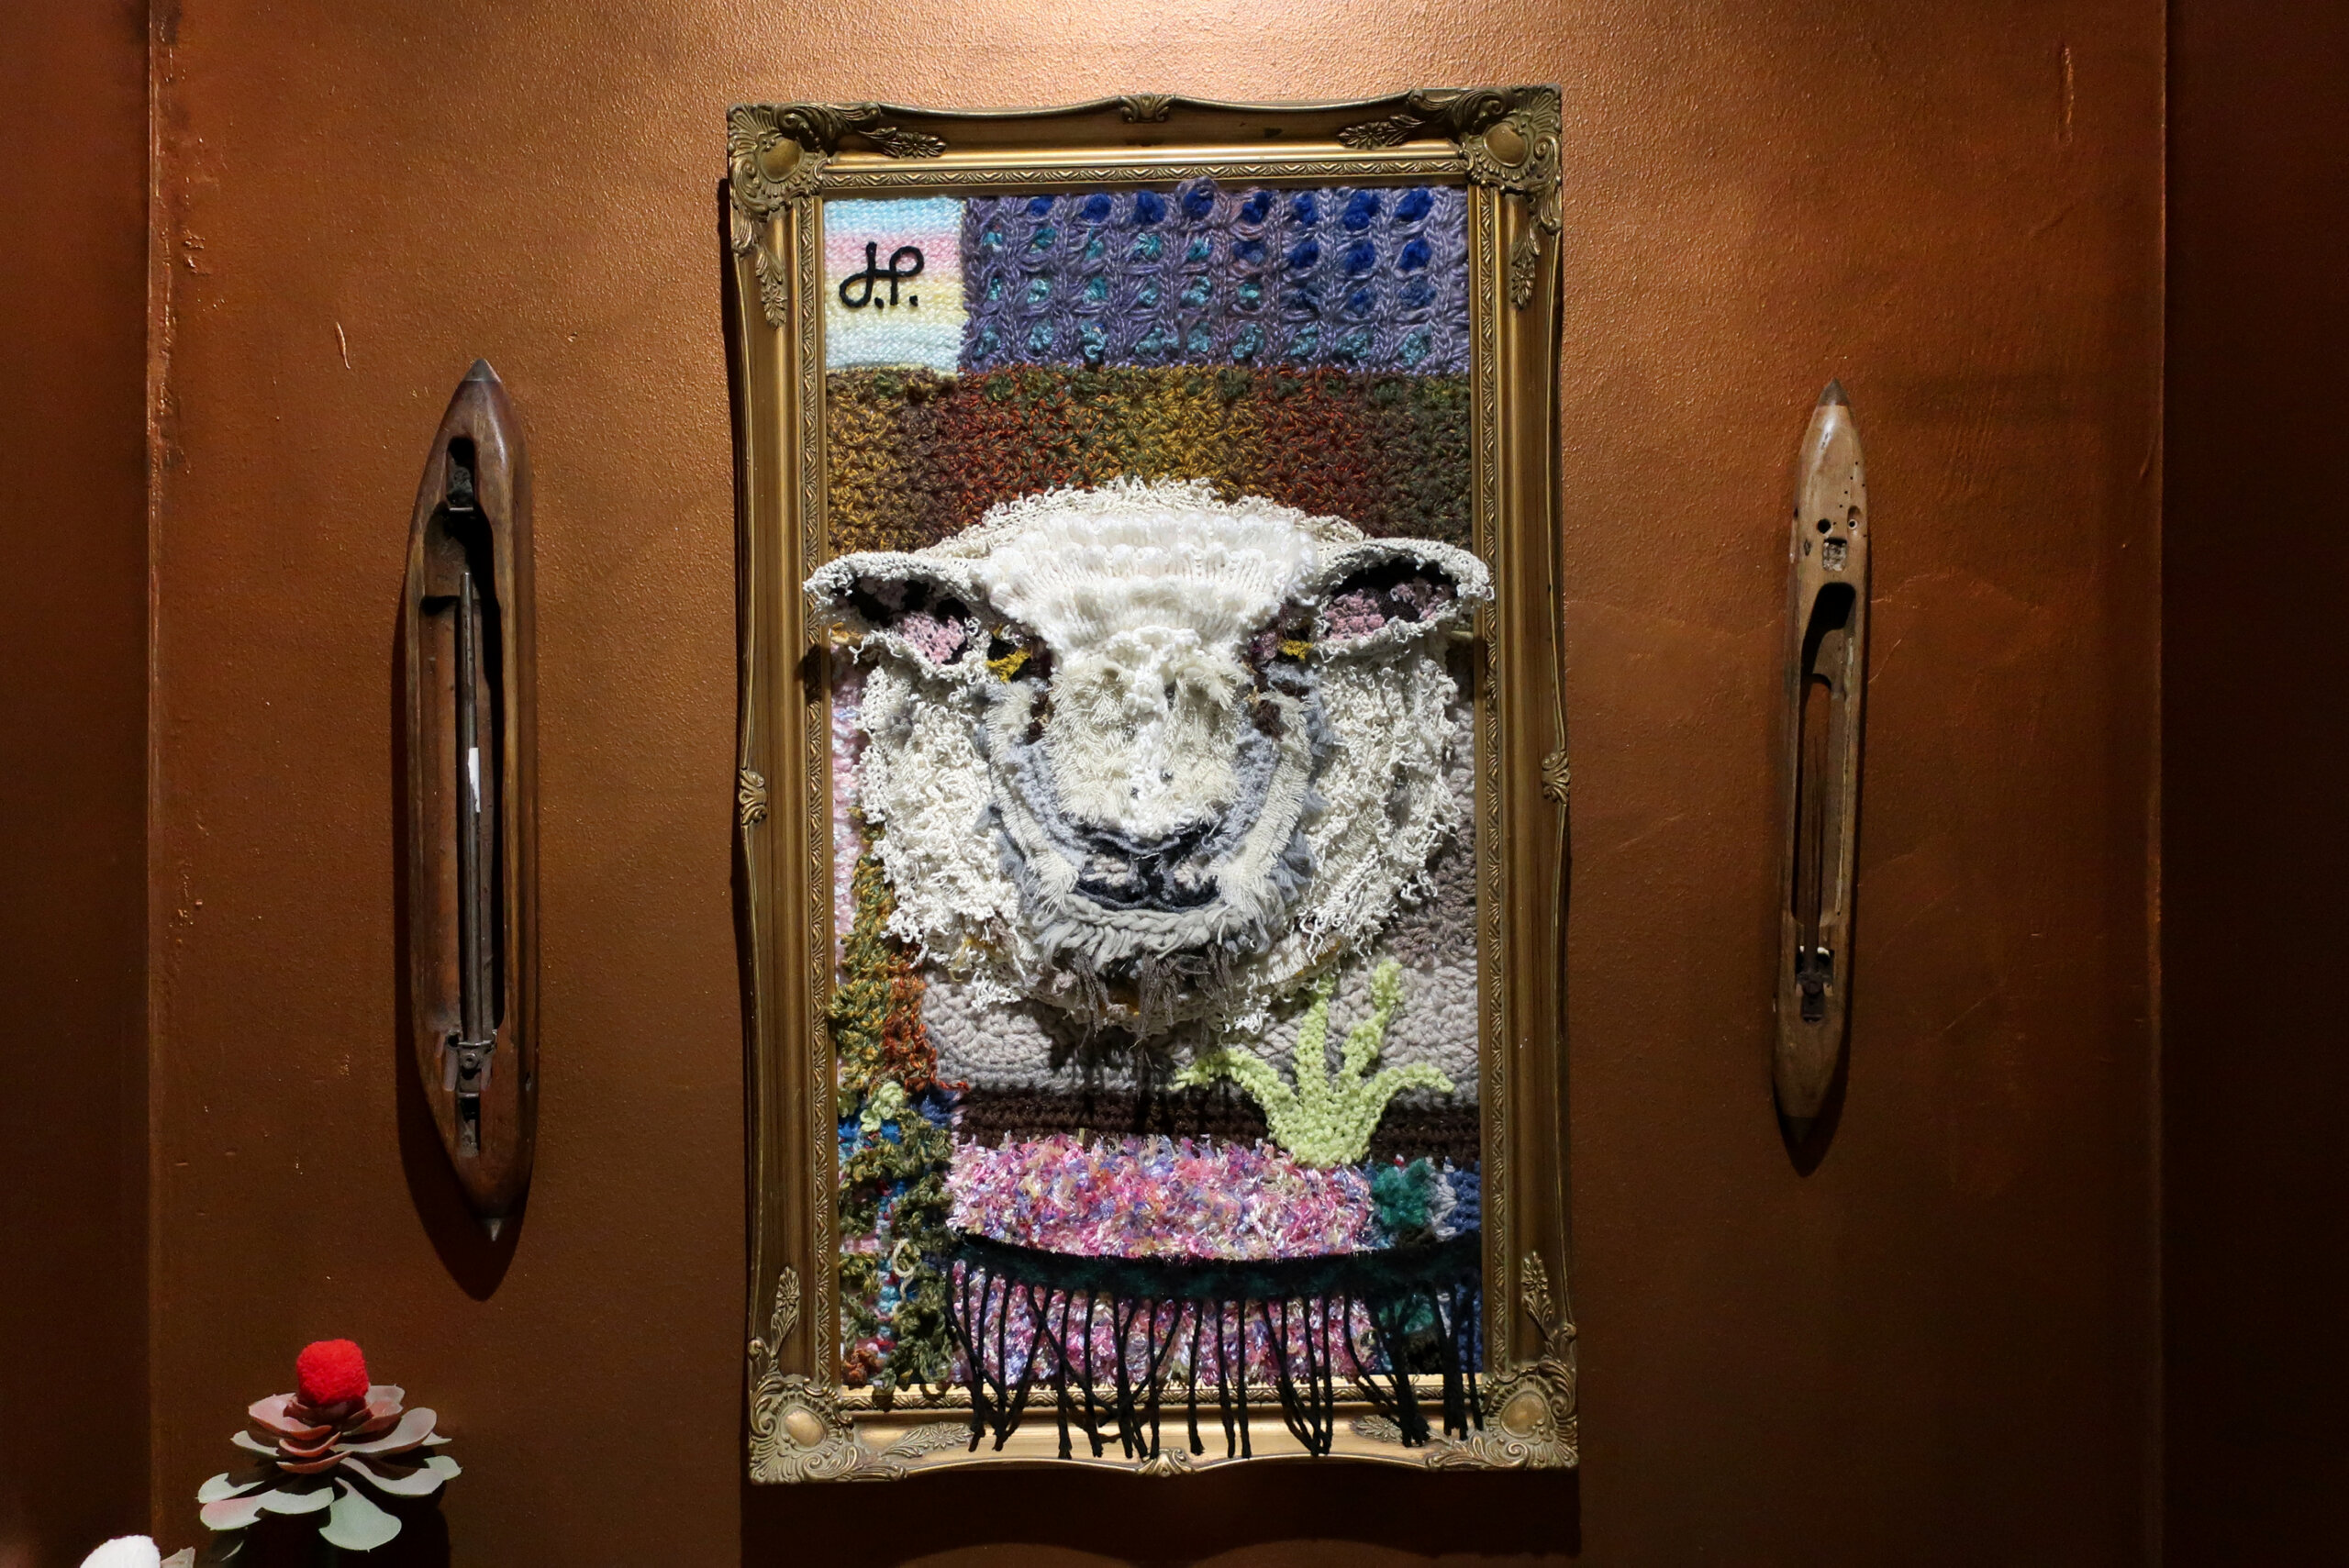 A portrait of a sheep made up of the wool offcuts reused in a picture frame.